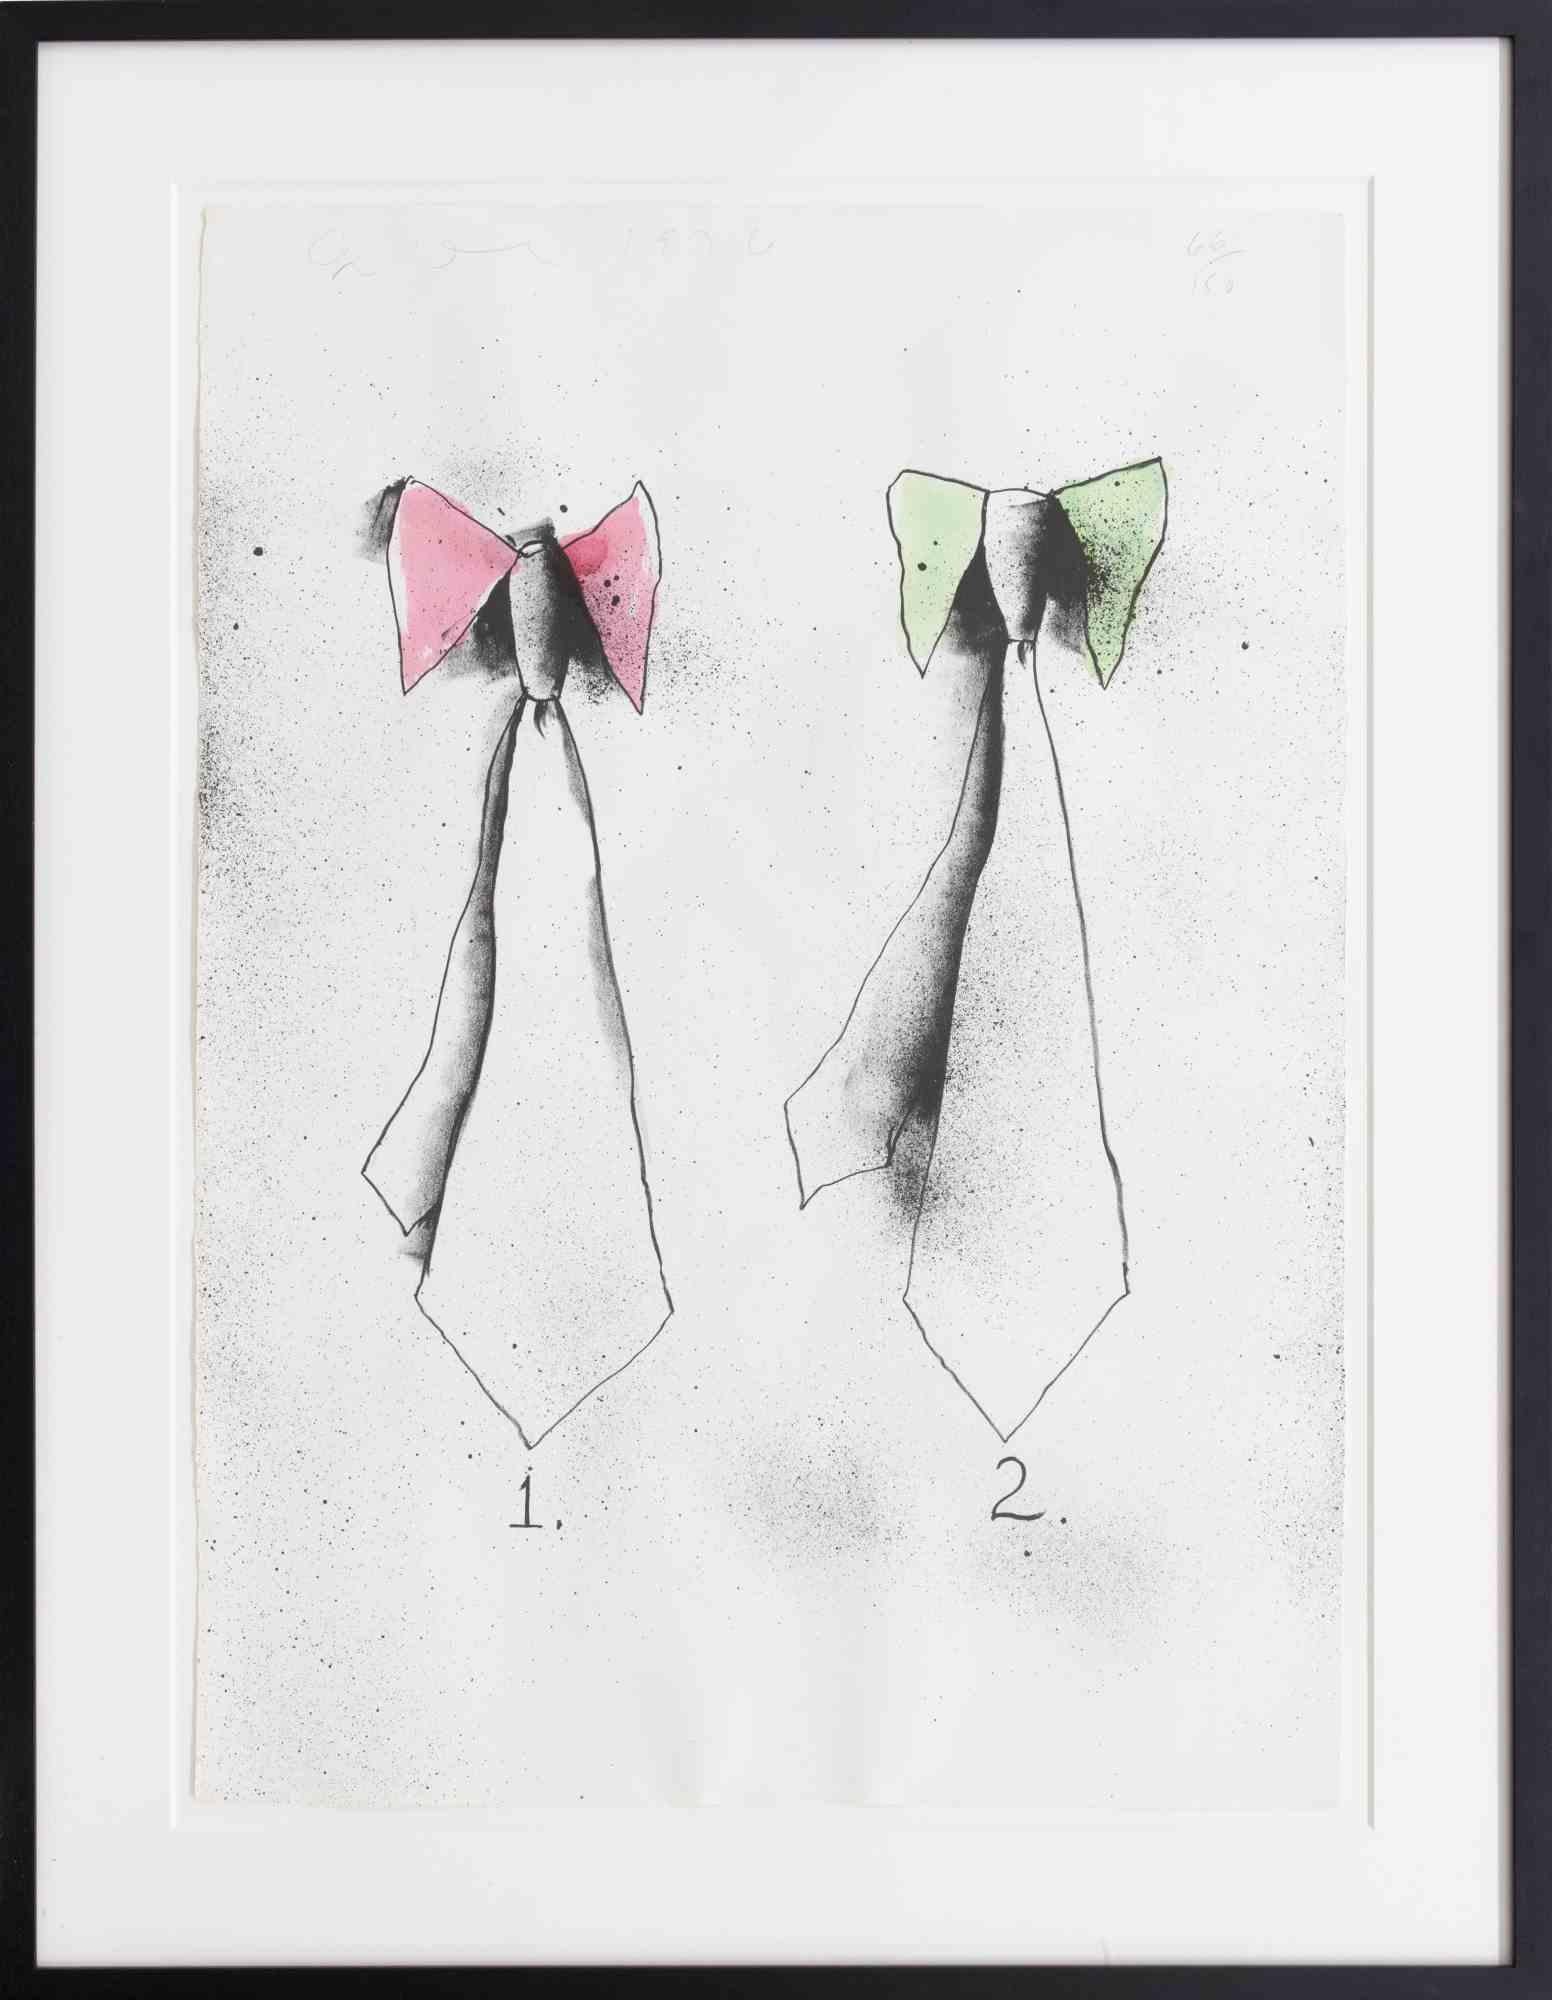 Ties is a contemporary artwork realized by Jim Dine in 1976.

Mixed colored lithograph. 

Edition of 66/150. 

The artwork is from the portfolio: Bathrobe, Hands, Ties, Saw, Rainbow, Boots 1970/76.

Printed in wove paper, signed, dated, and numbered